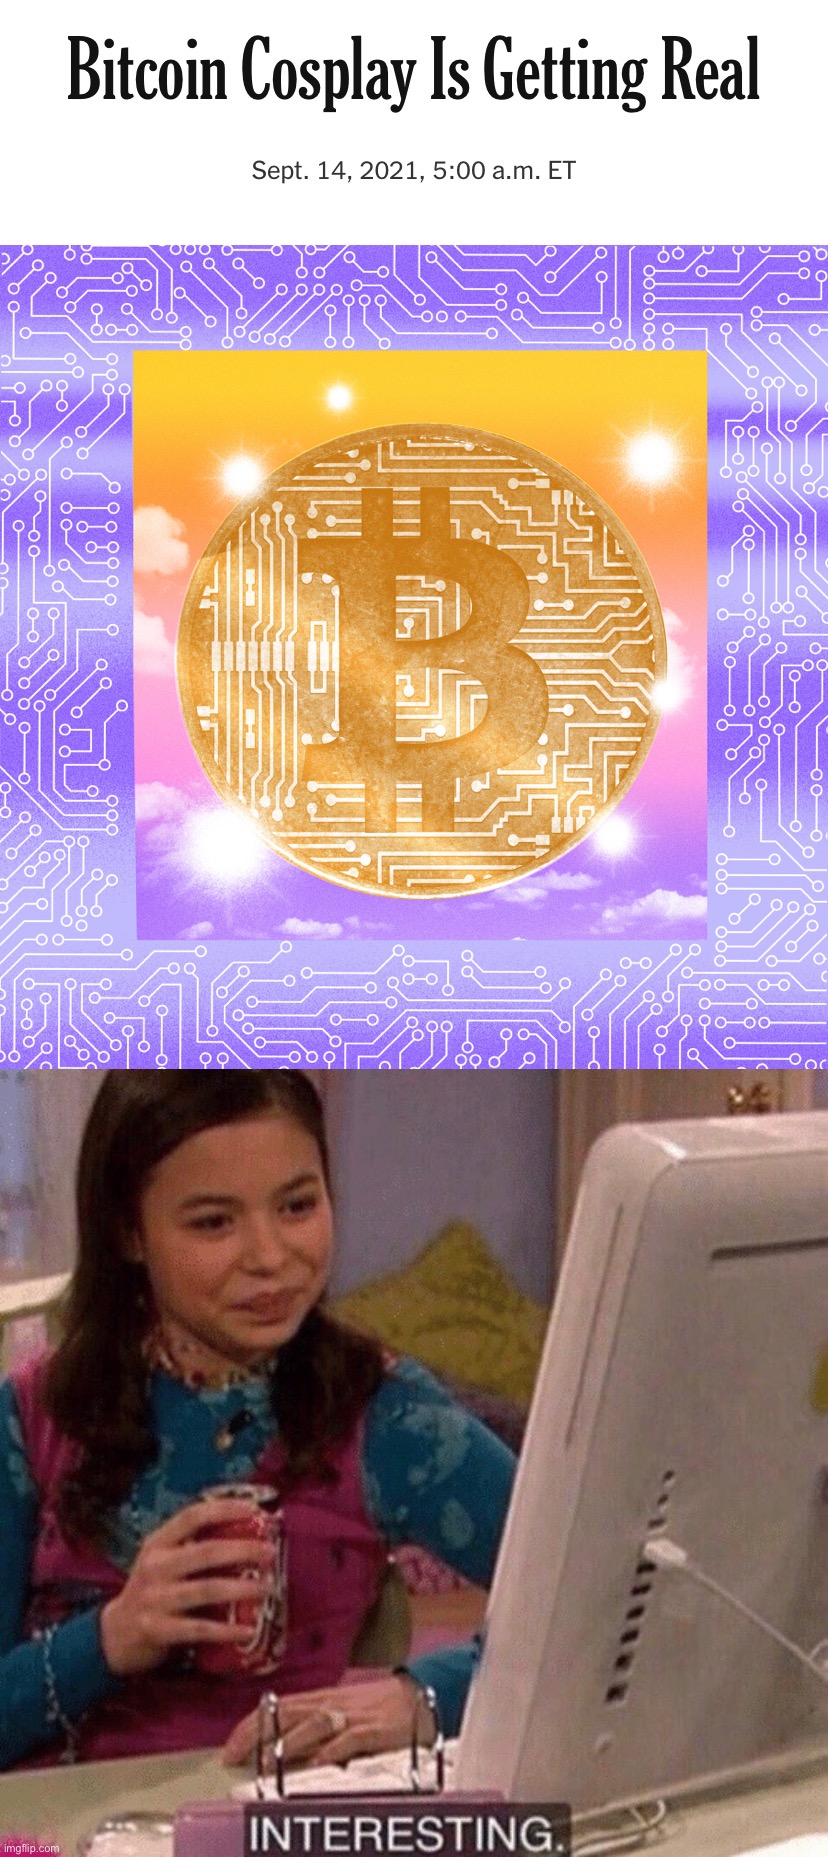 Bitcoin is an interesting niche product but not actually all that useful to average people. It’s like digitized gold | image tagged in icarly interesting,bitcoin,cryptocurrency,crypto,currency,money | made w/ Imgflip meme maker